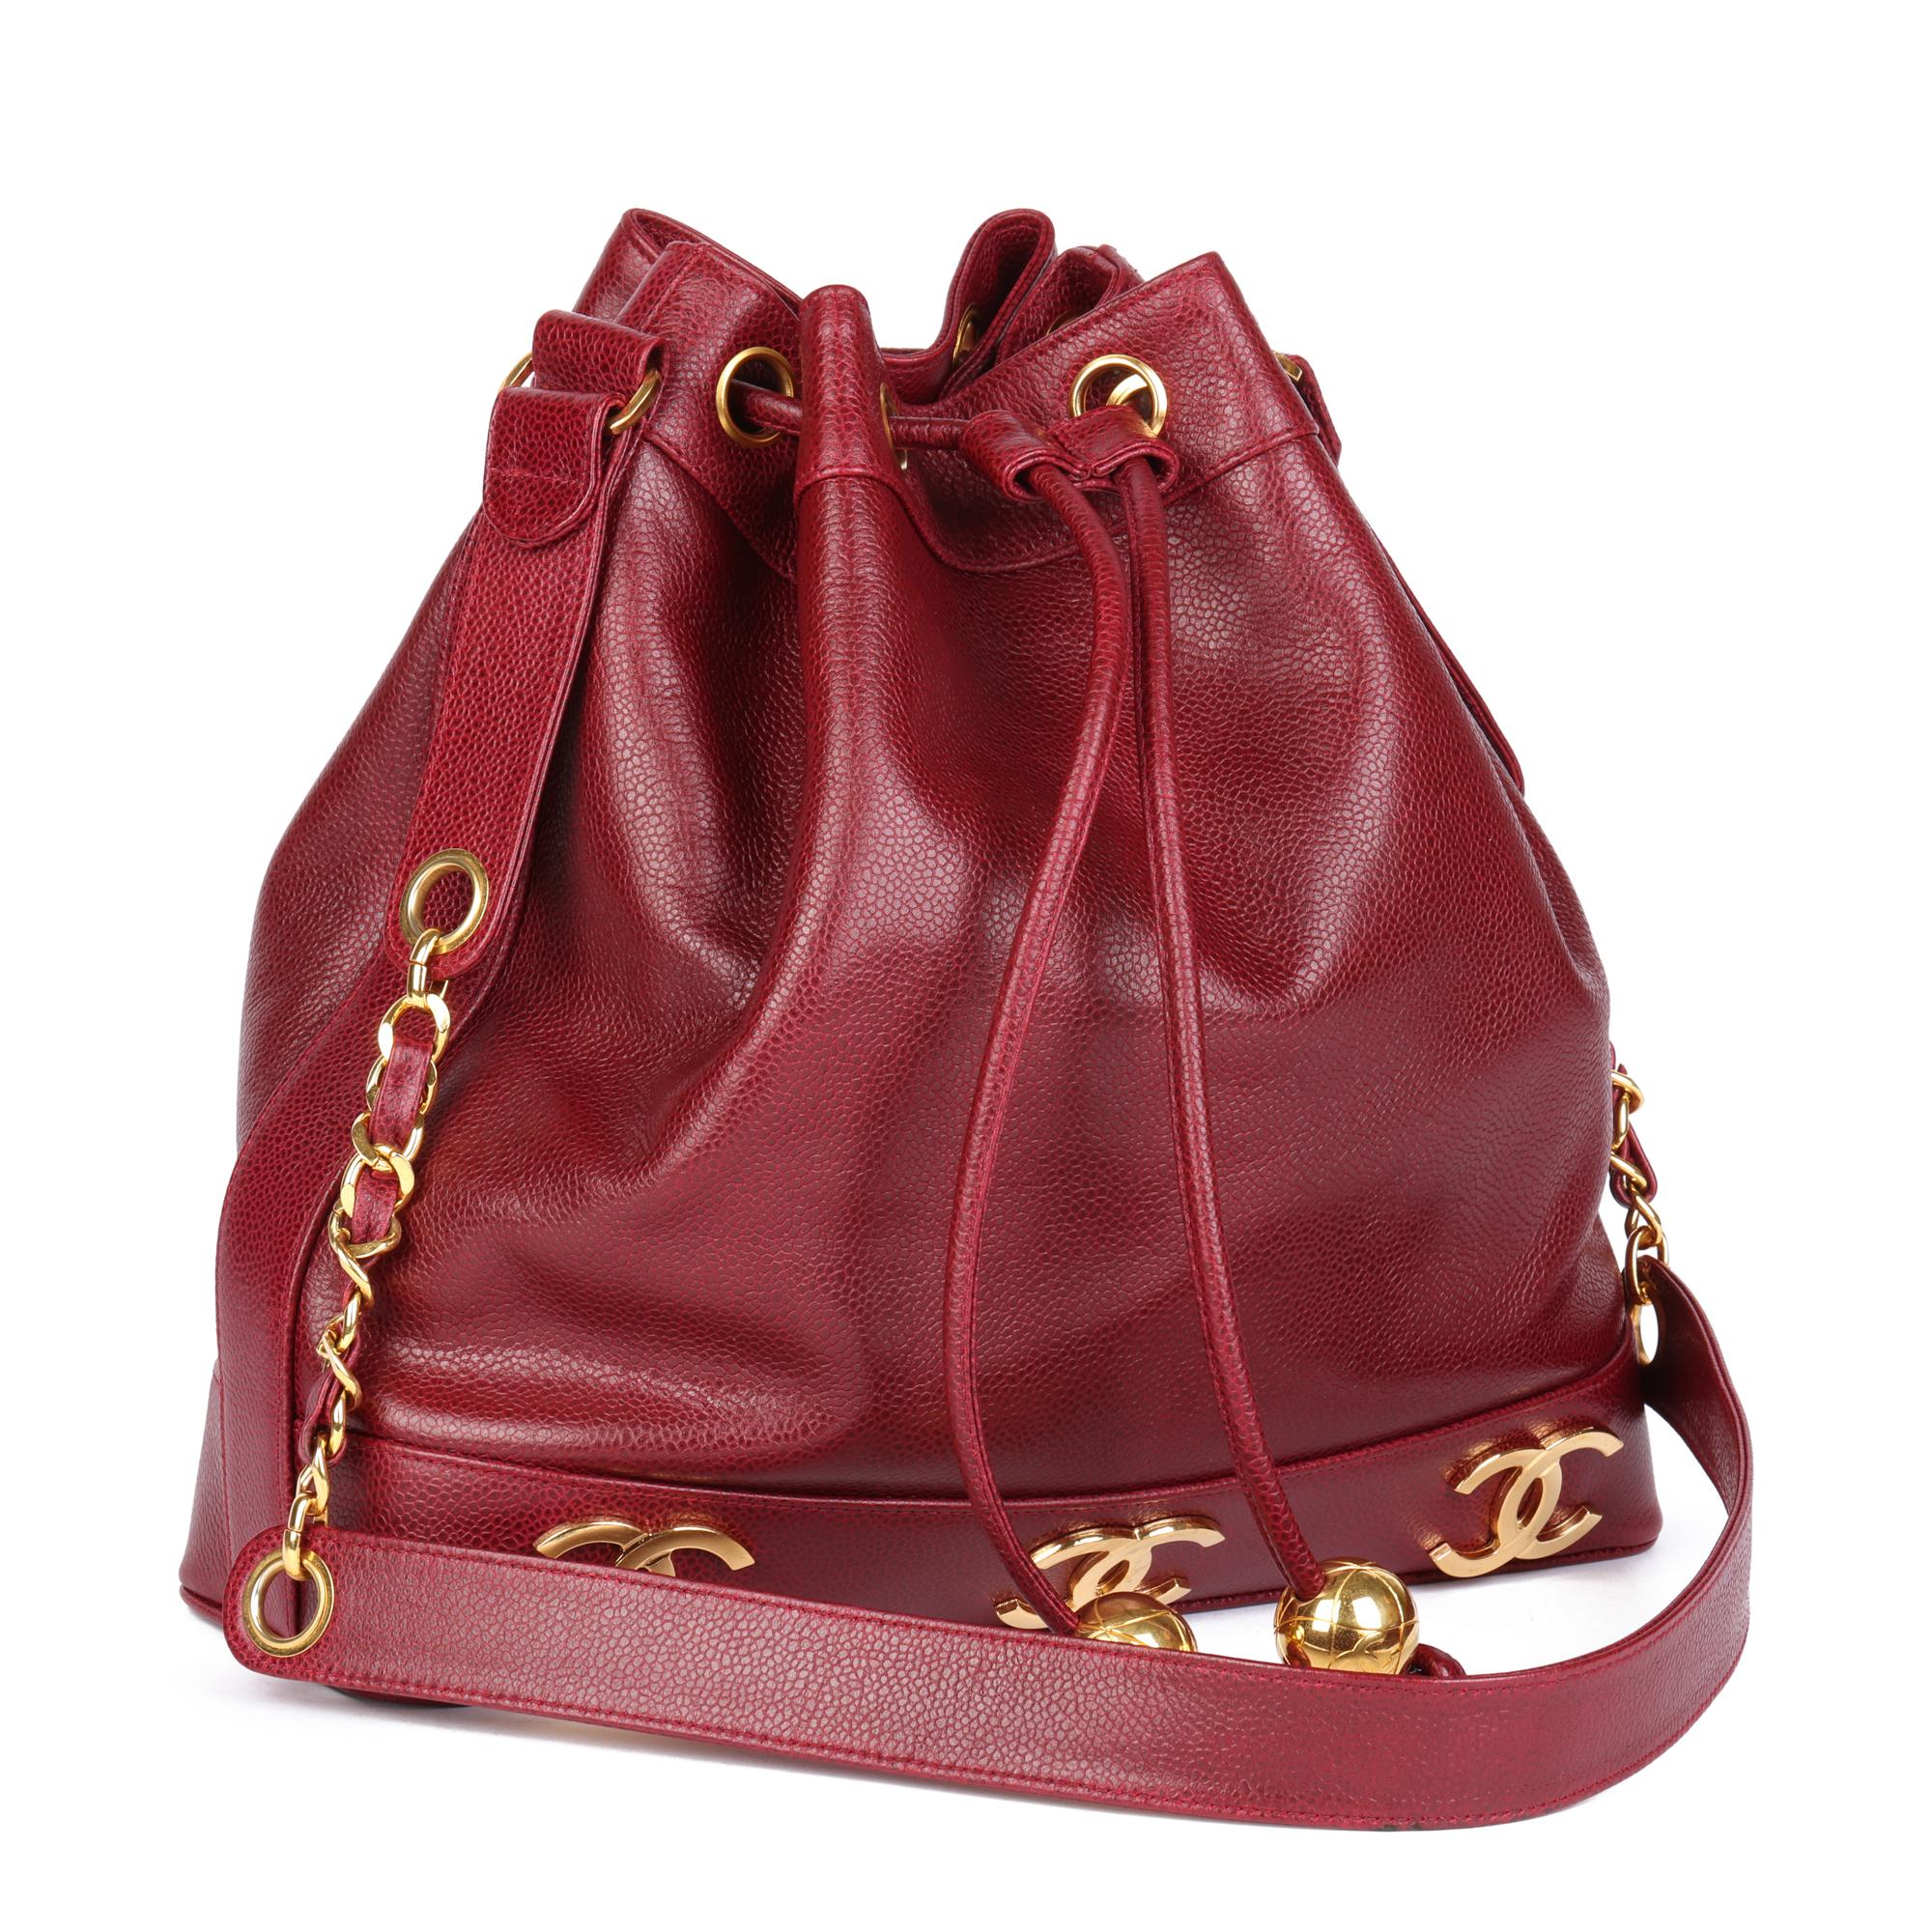 CHANEL
Bordeaux Caviar Leather Vintage Classic Logo Trim Bucket Bag with Pouch

Serial Number: 2950500
Age (Circa): 1992
Accompanied By: Interior Pouch
Authenticity Details: Serial Sticker (Made in Italy)
Gender: Ladies
Type: Shoulder

Colour: